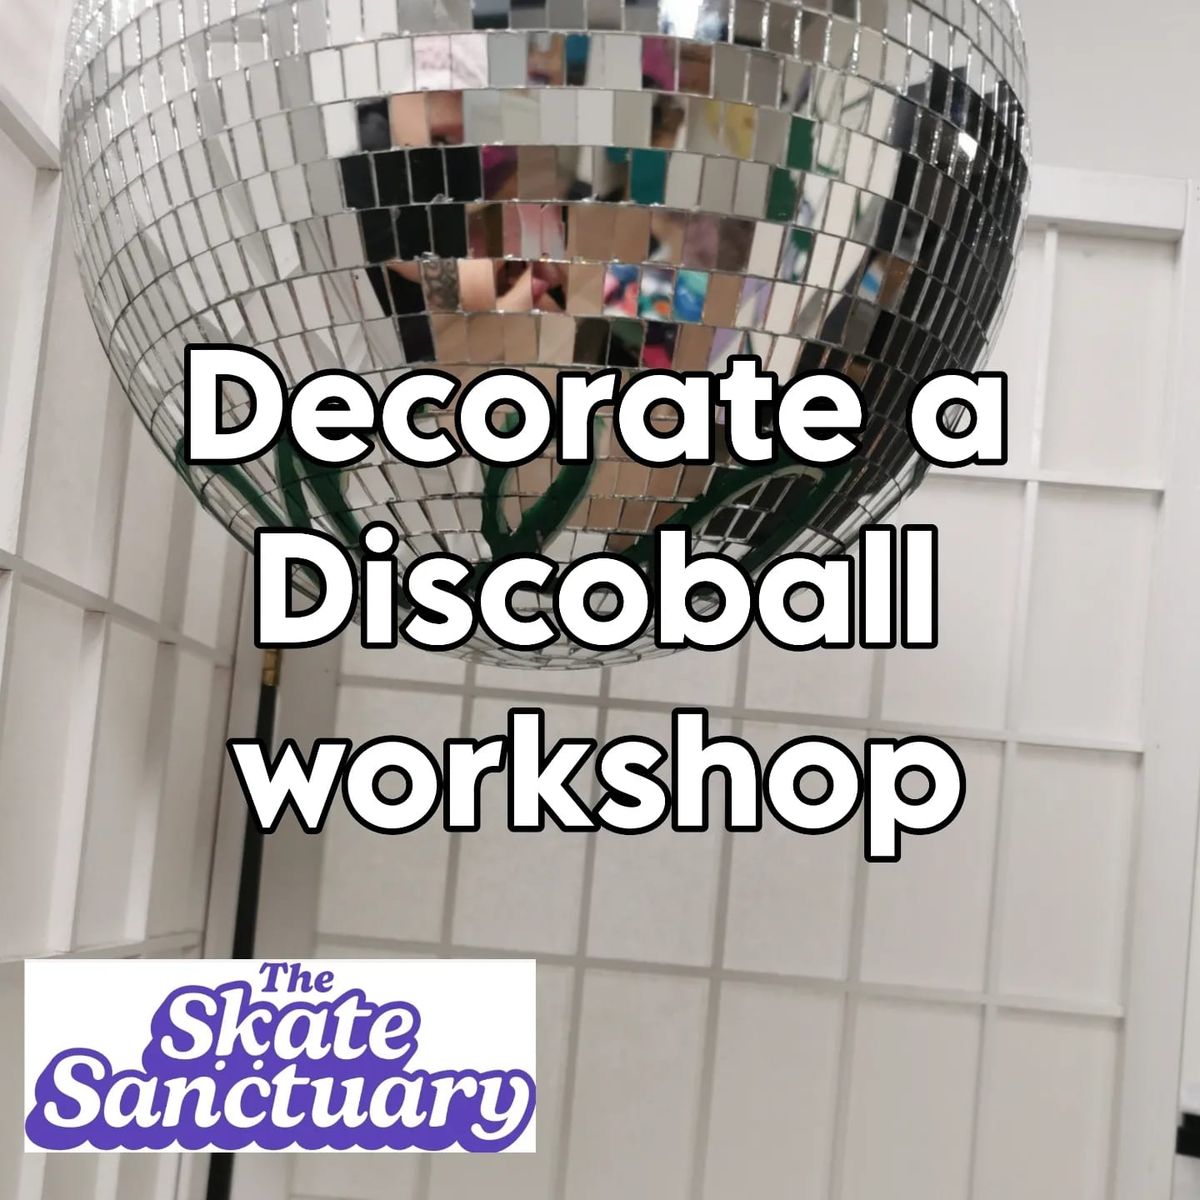 Decorate a Discoball Workshop